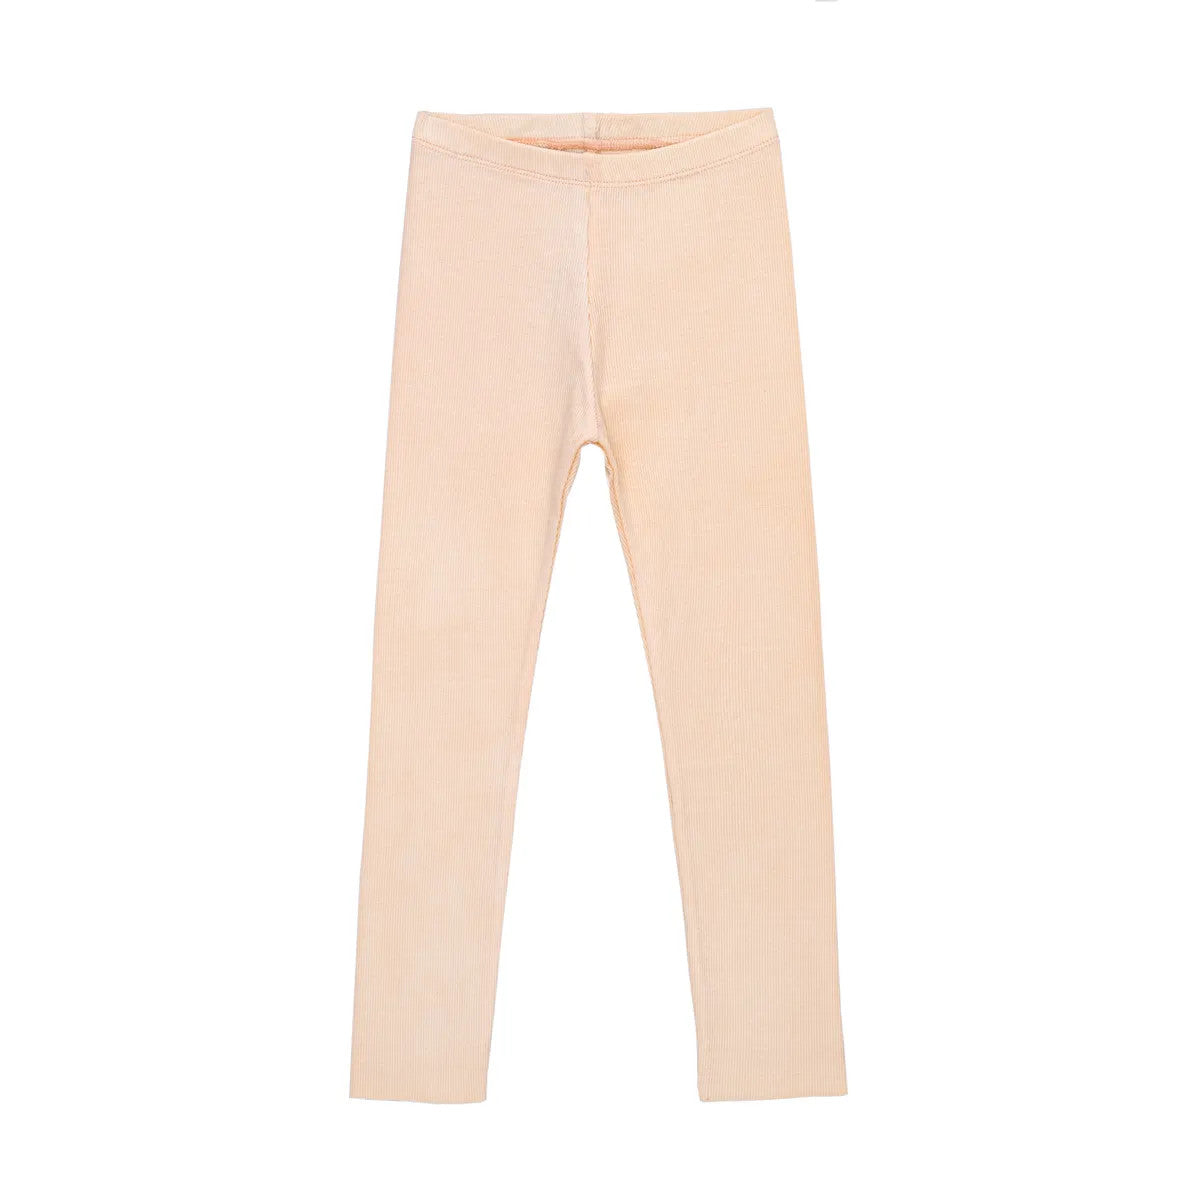 Little Hedonist organic skinny legging made of our softest rib, in peach color